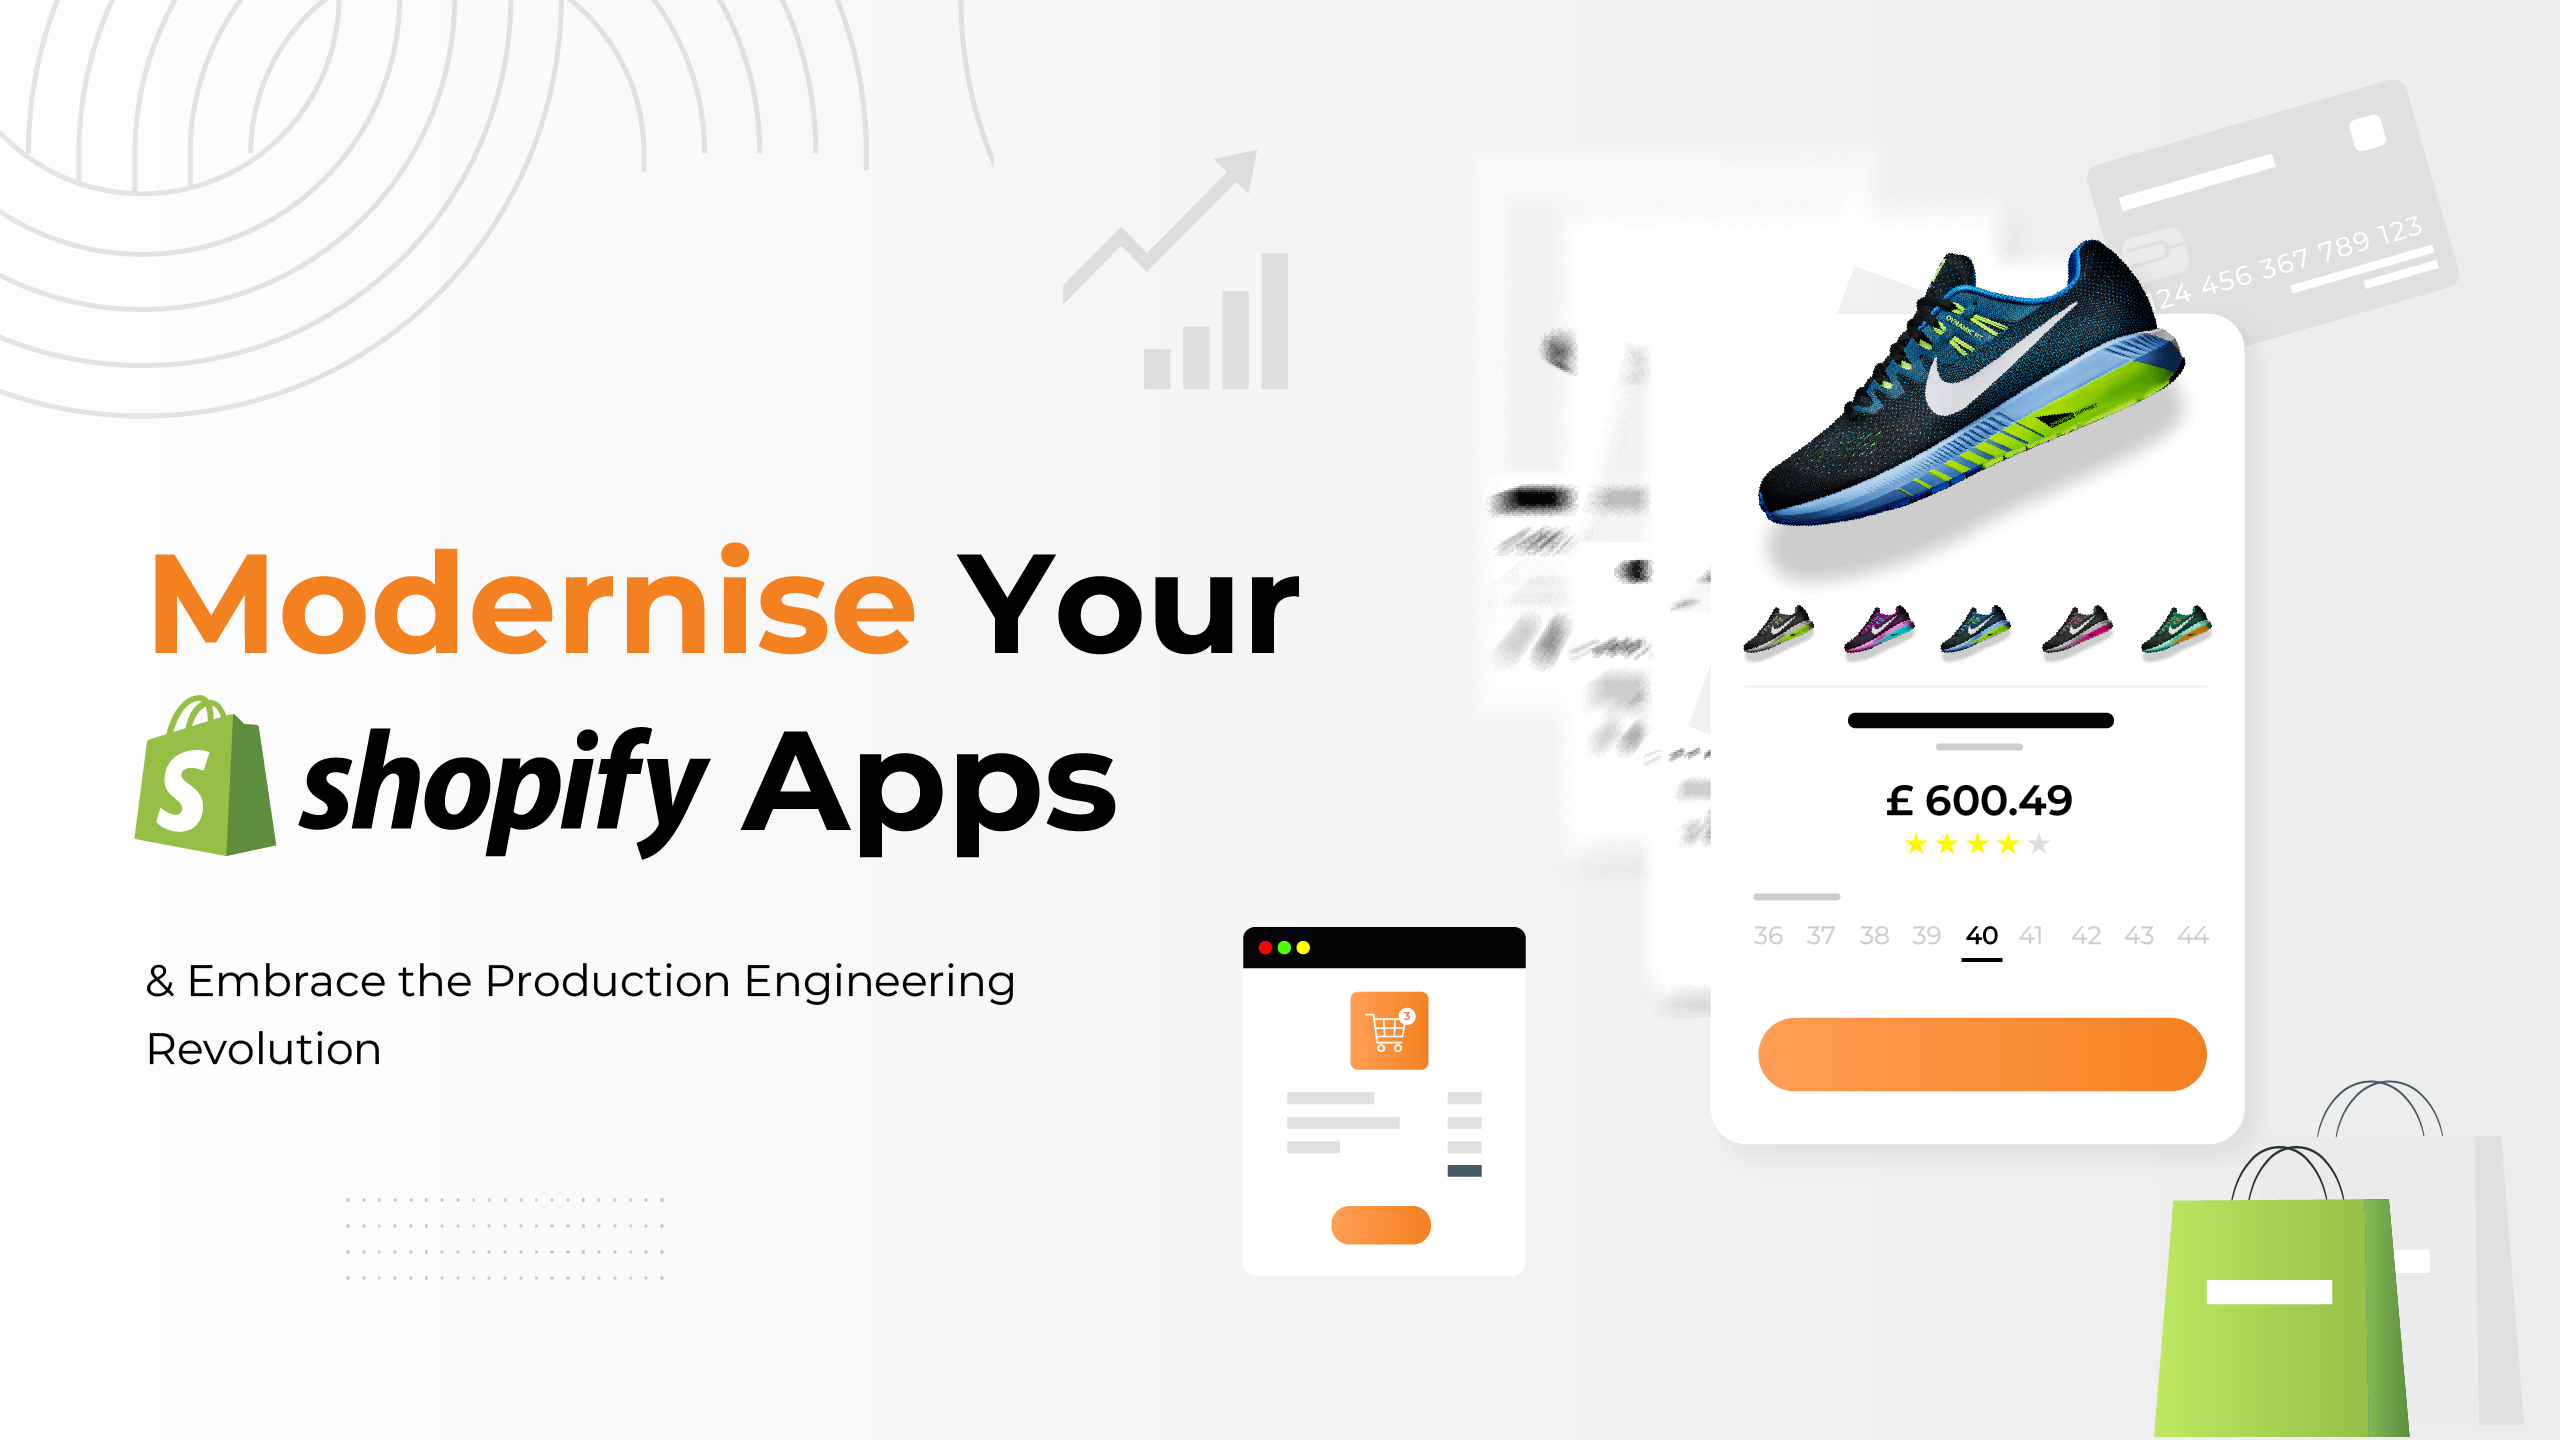 Modernise Your Shopify Apps and Partner Solutions Using DevOps Approach